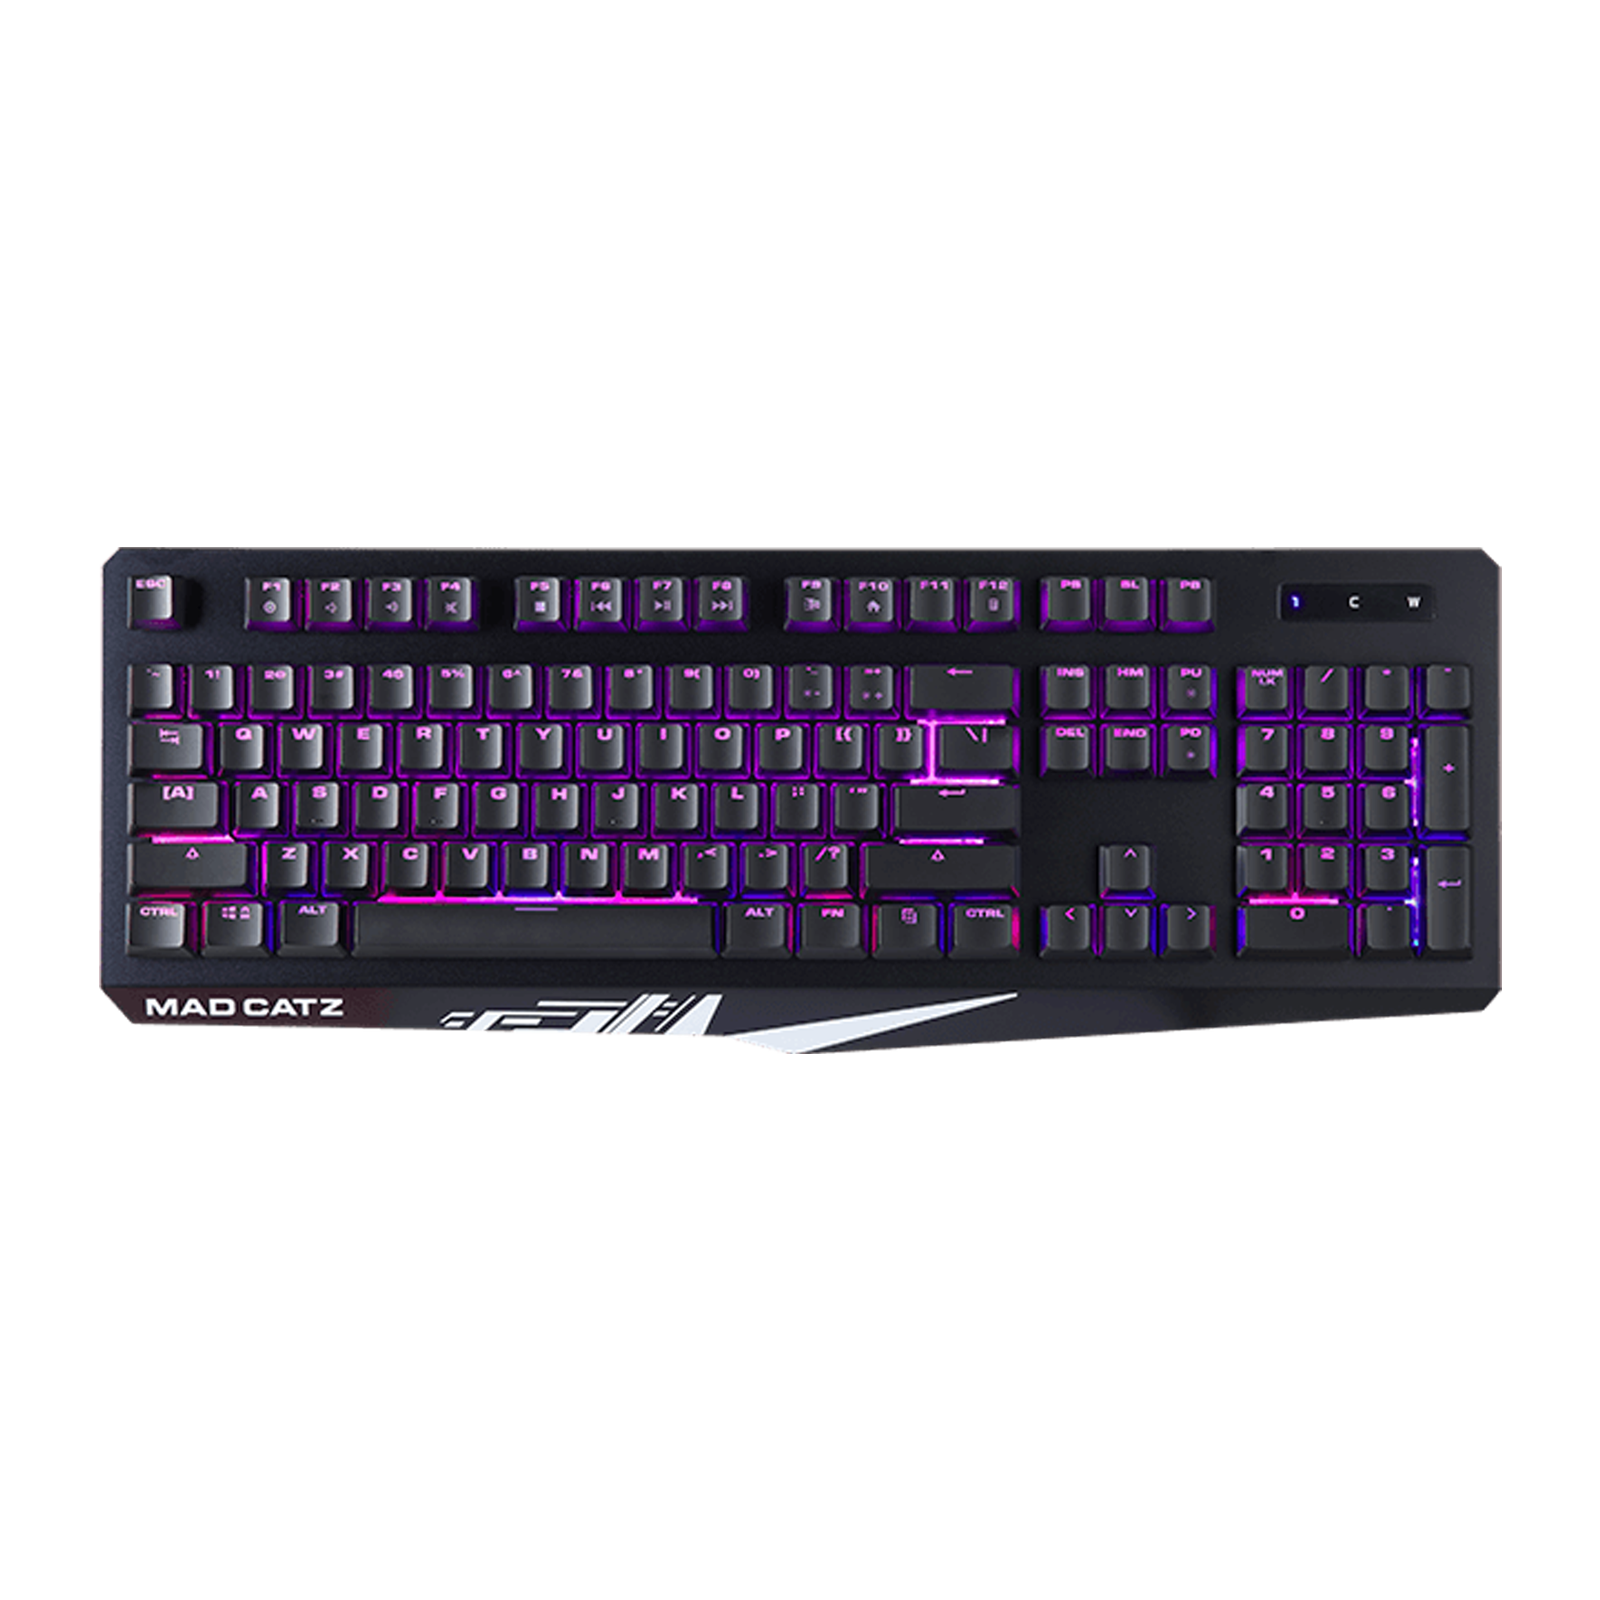 Mad Catz The Authentic S.T.R.I.K.E. 2 Wired Gaming Keyboard with Backlit Keys (Anti Ghosting Keys, Black)_1